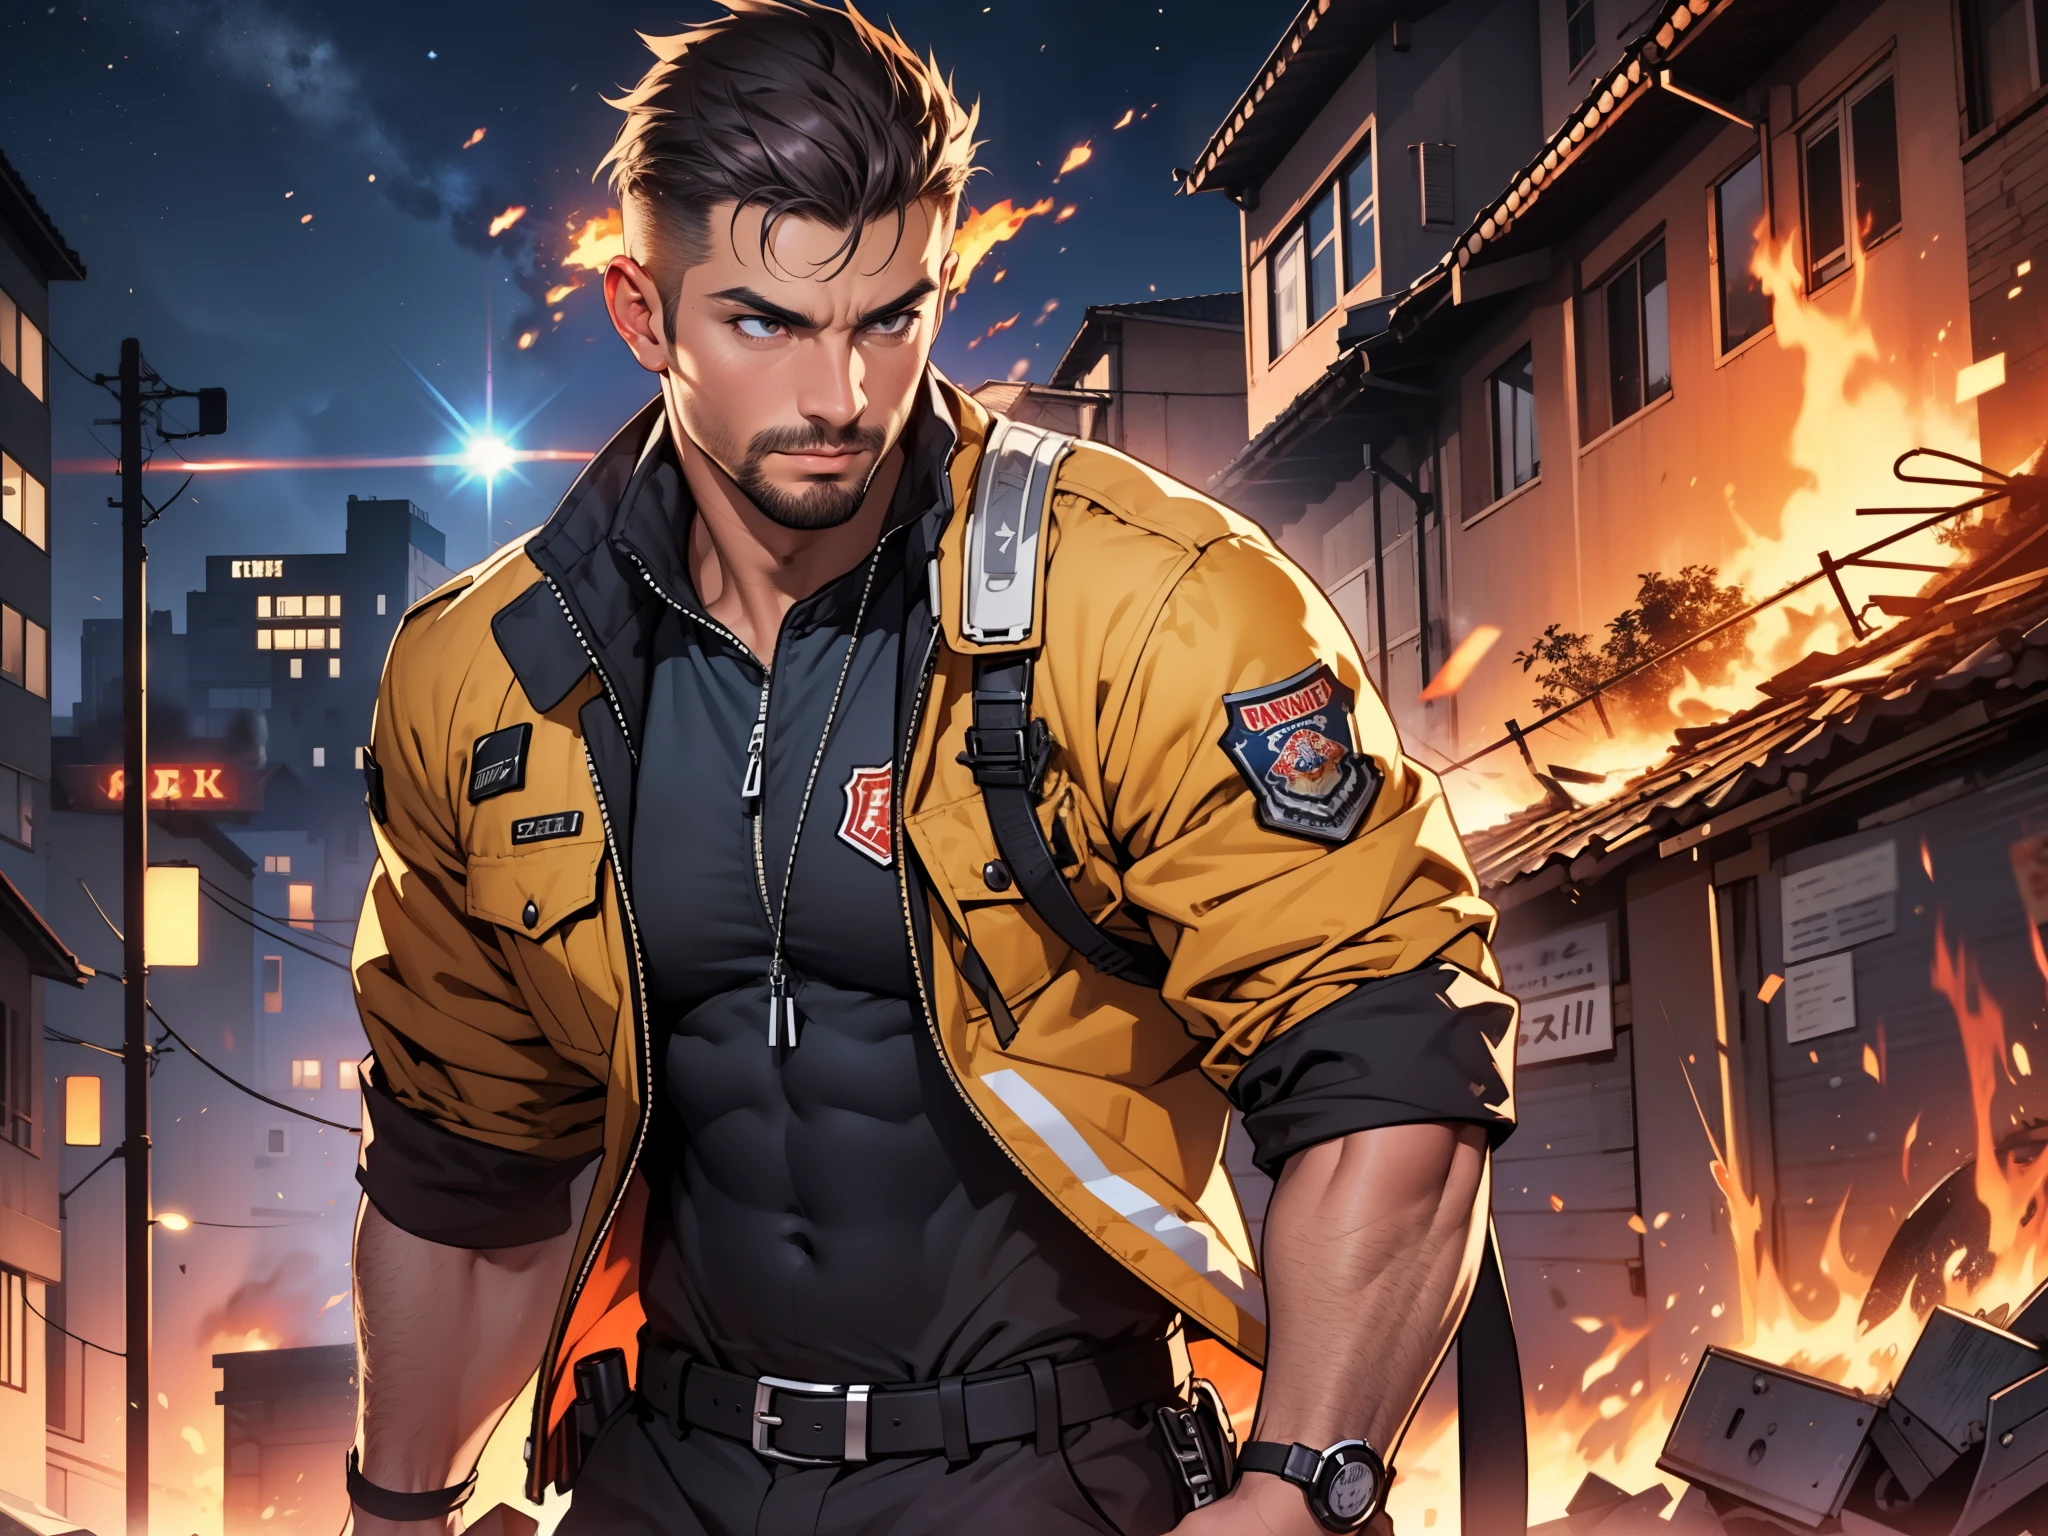 sexy mature daddy, tanned-skin, big bulge, darker skin, stubble, muscular, experienced firefighter, putting out fire, building on fire at night, uniform, look of determination